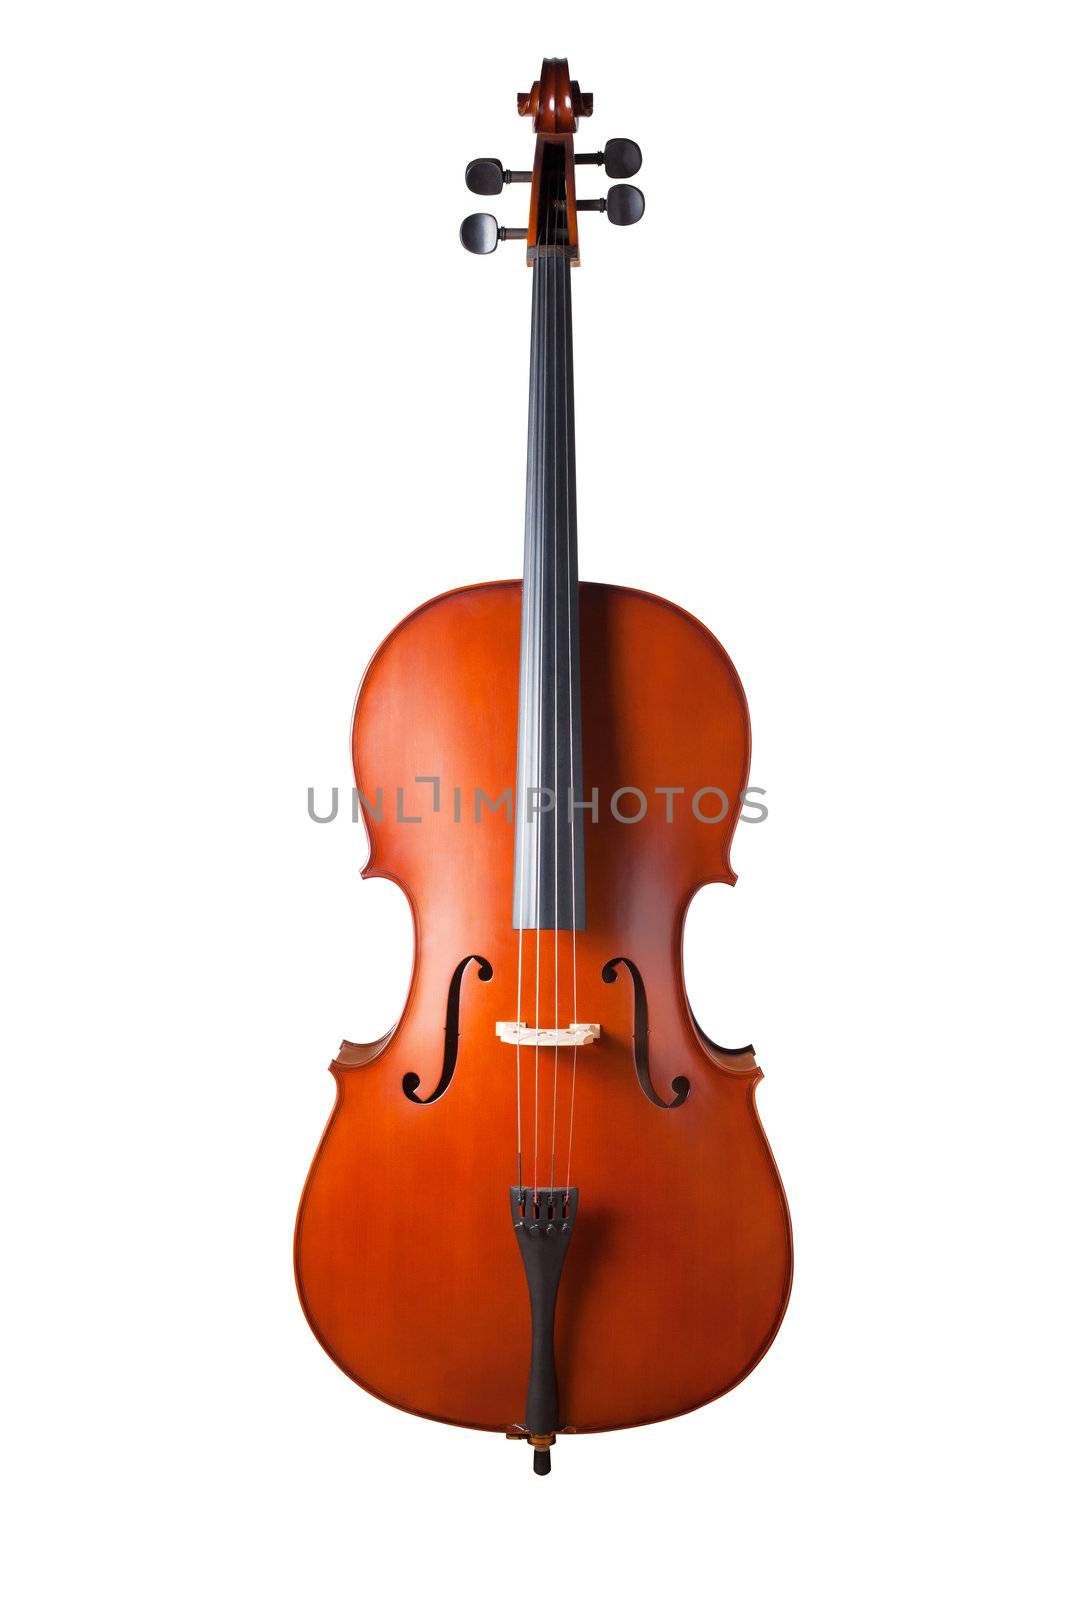 Violin isolated on white background. with clipping path by Suriyaphoto